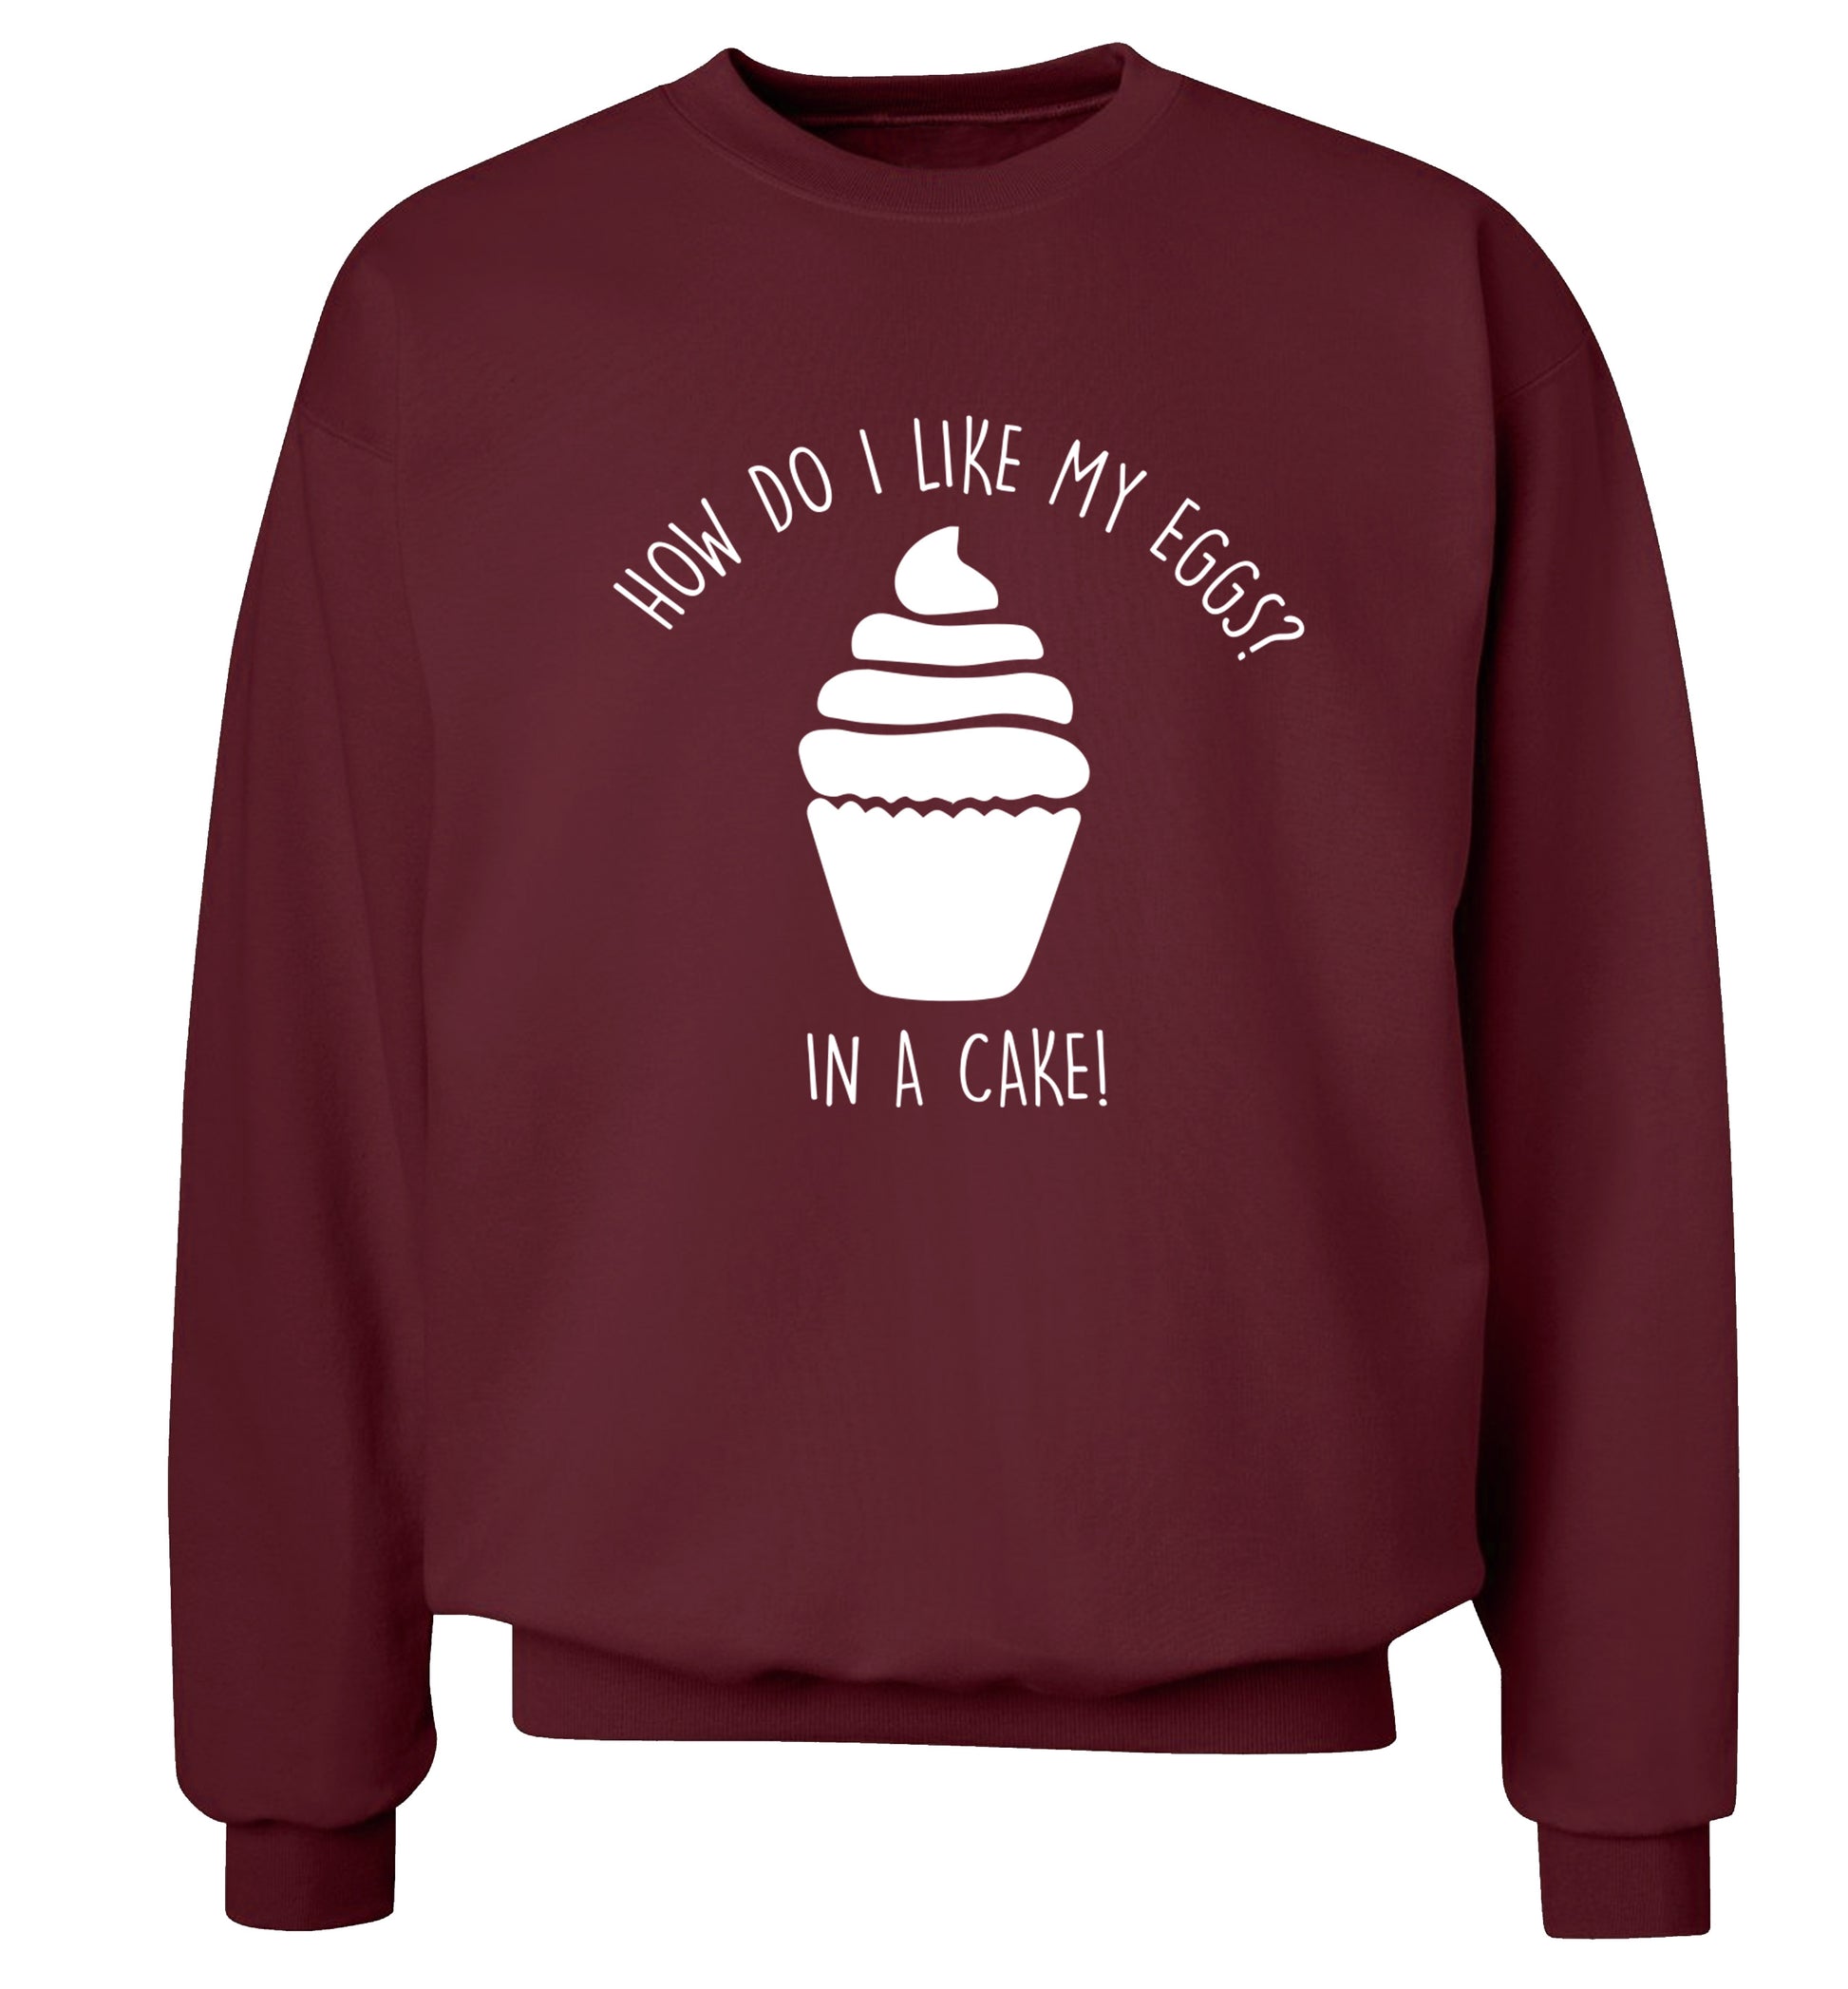 How do I like my eggs? In a cake! Adult's unisex maroon Sweater 2XL